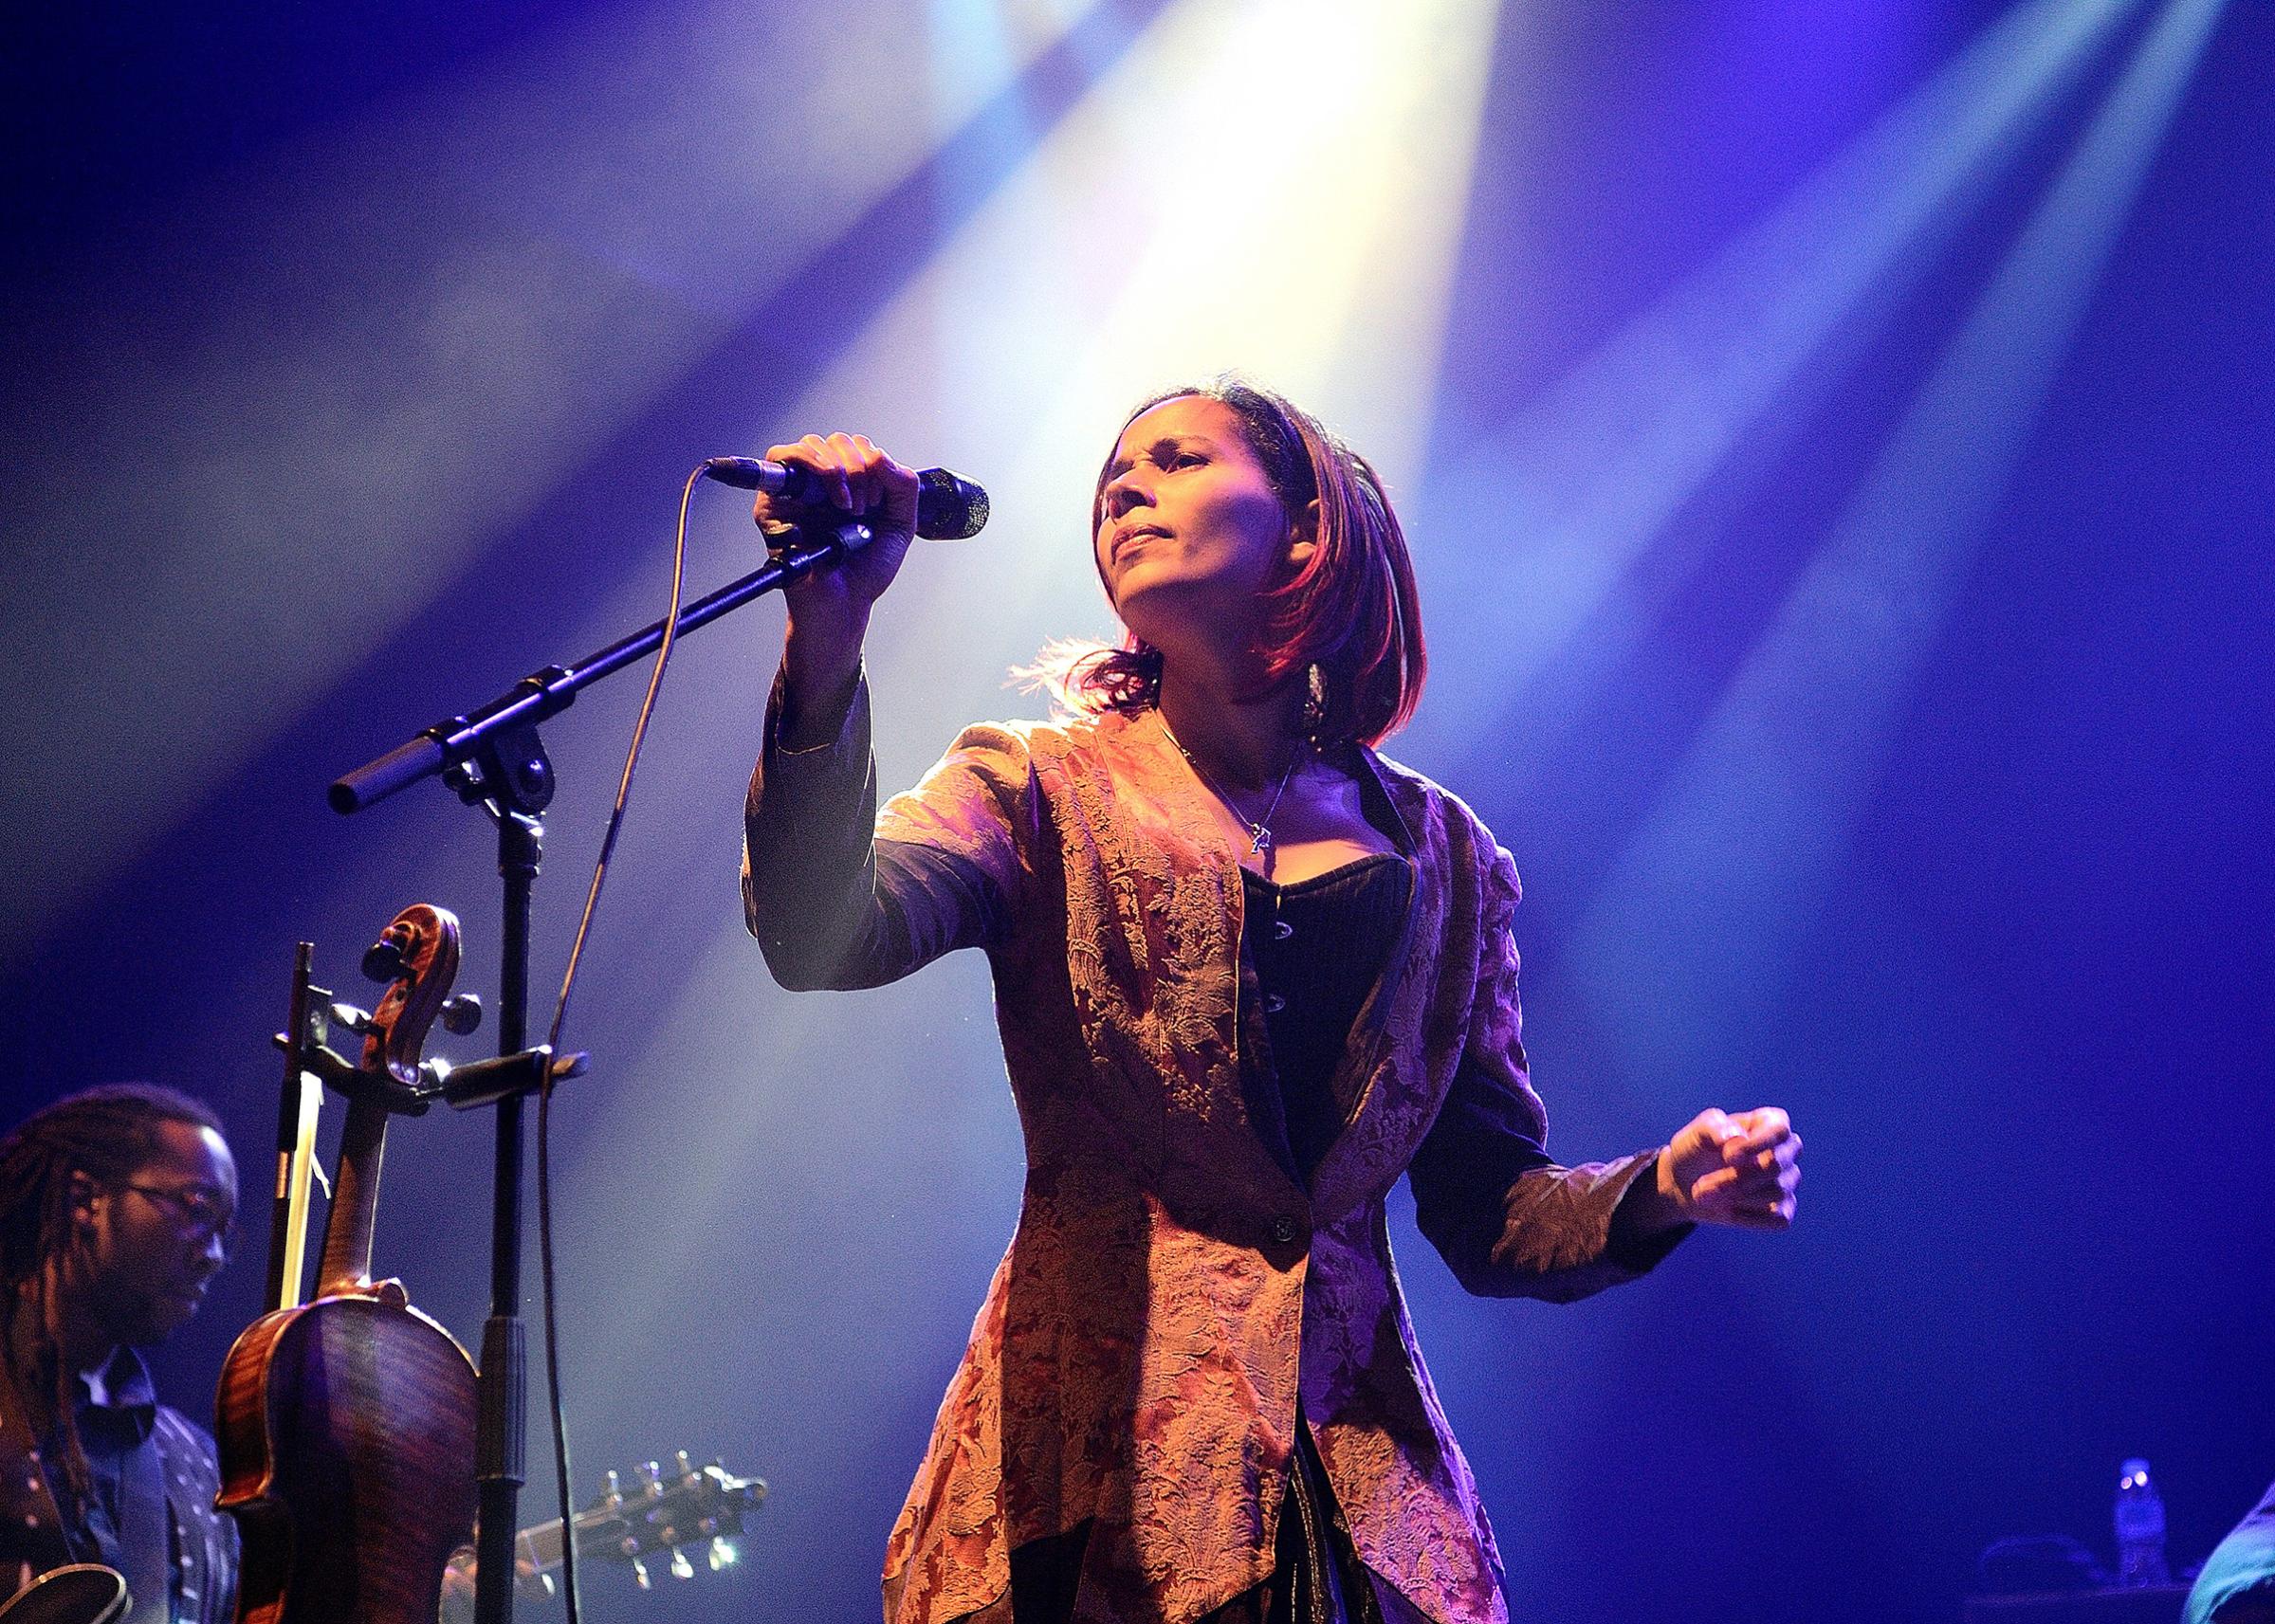 Rhiannon Giddens performs on stage at the O2 Shepherd's Bush Empire on Nov. 17, 2017.